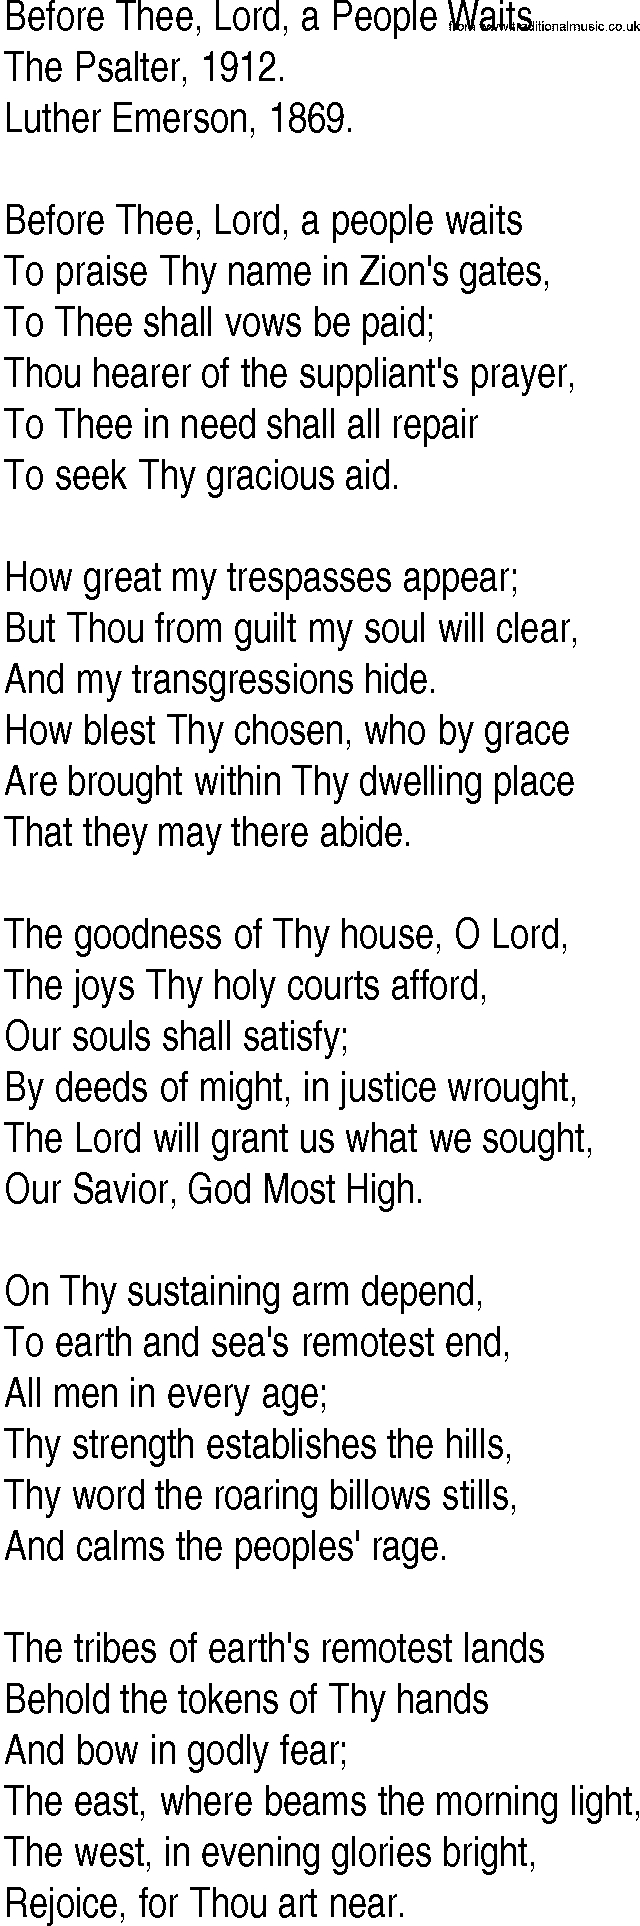 Hymn and Gospel Song: Before Thee, Lord, a People Waits by The Psalter lyrics